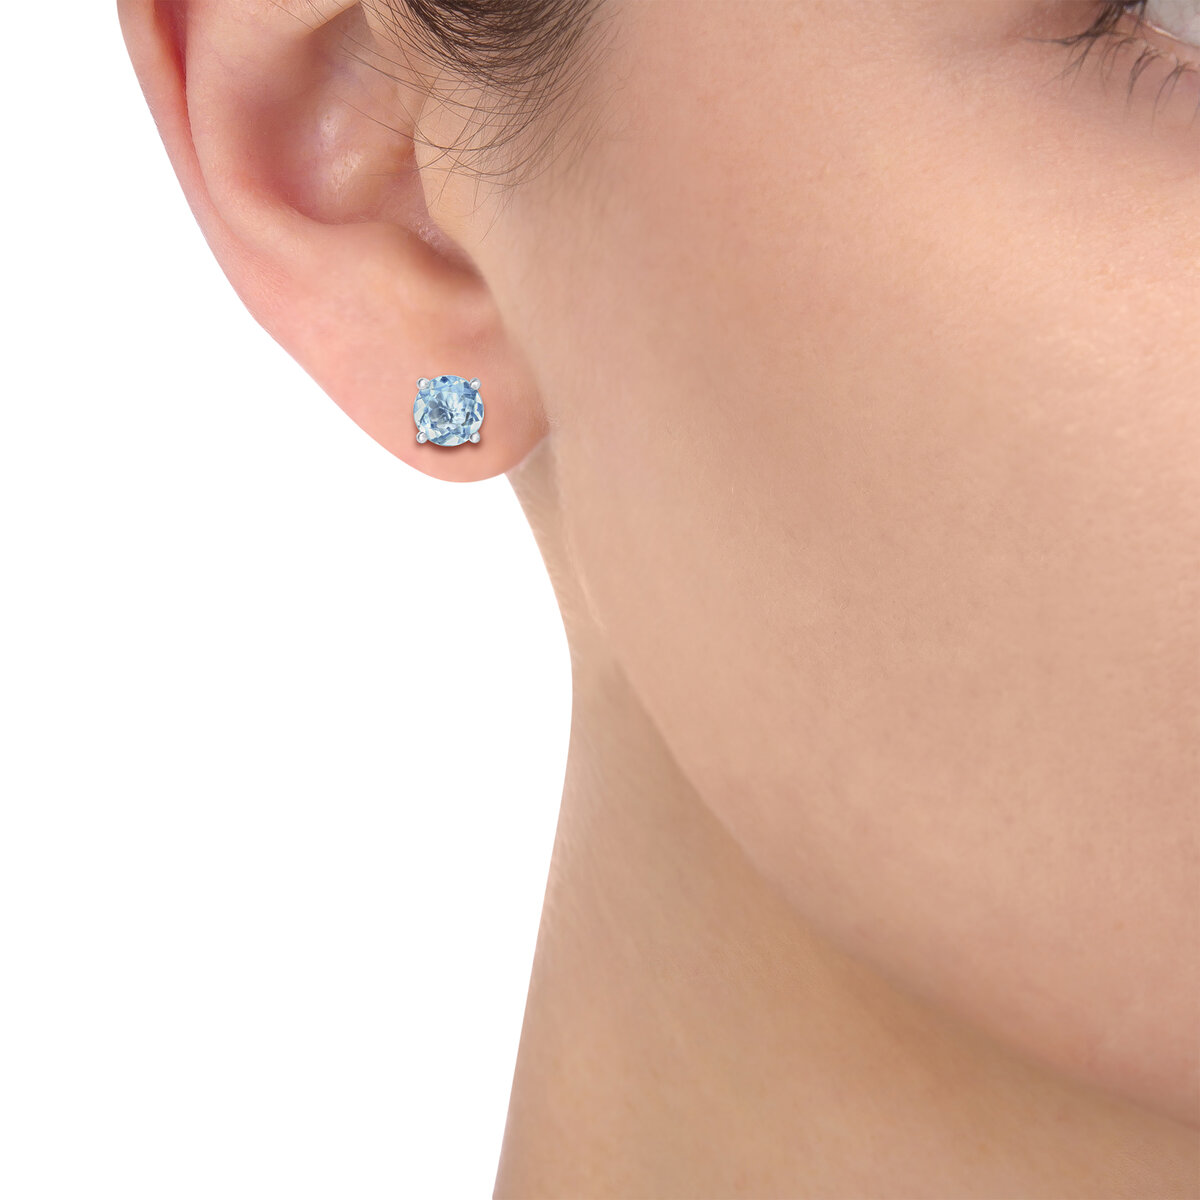 Round Cut Topaz Stud Earrings, 14ct White Gold